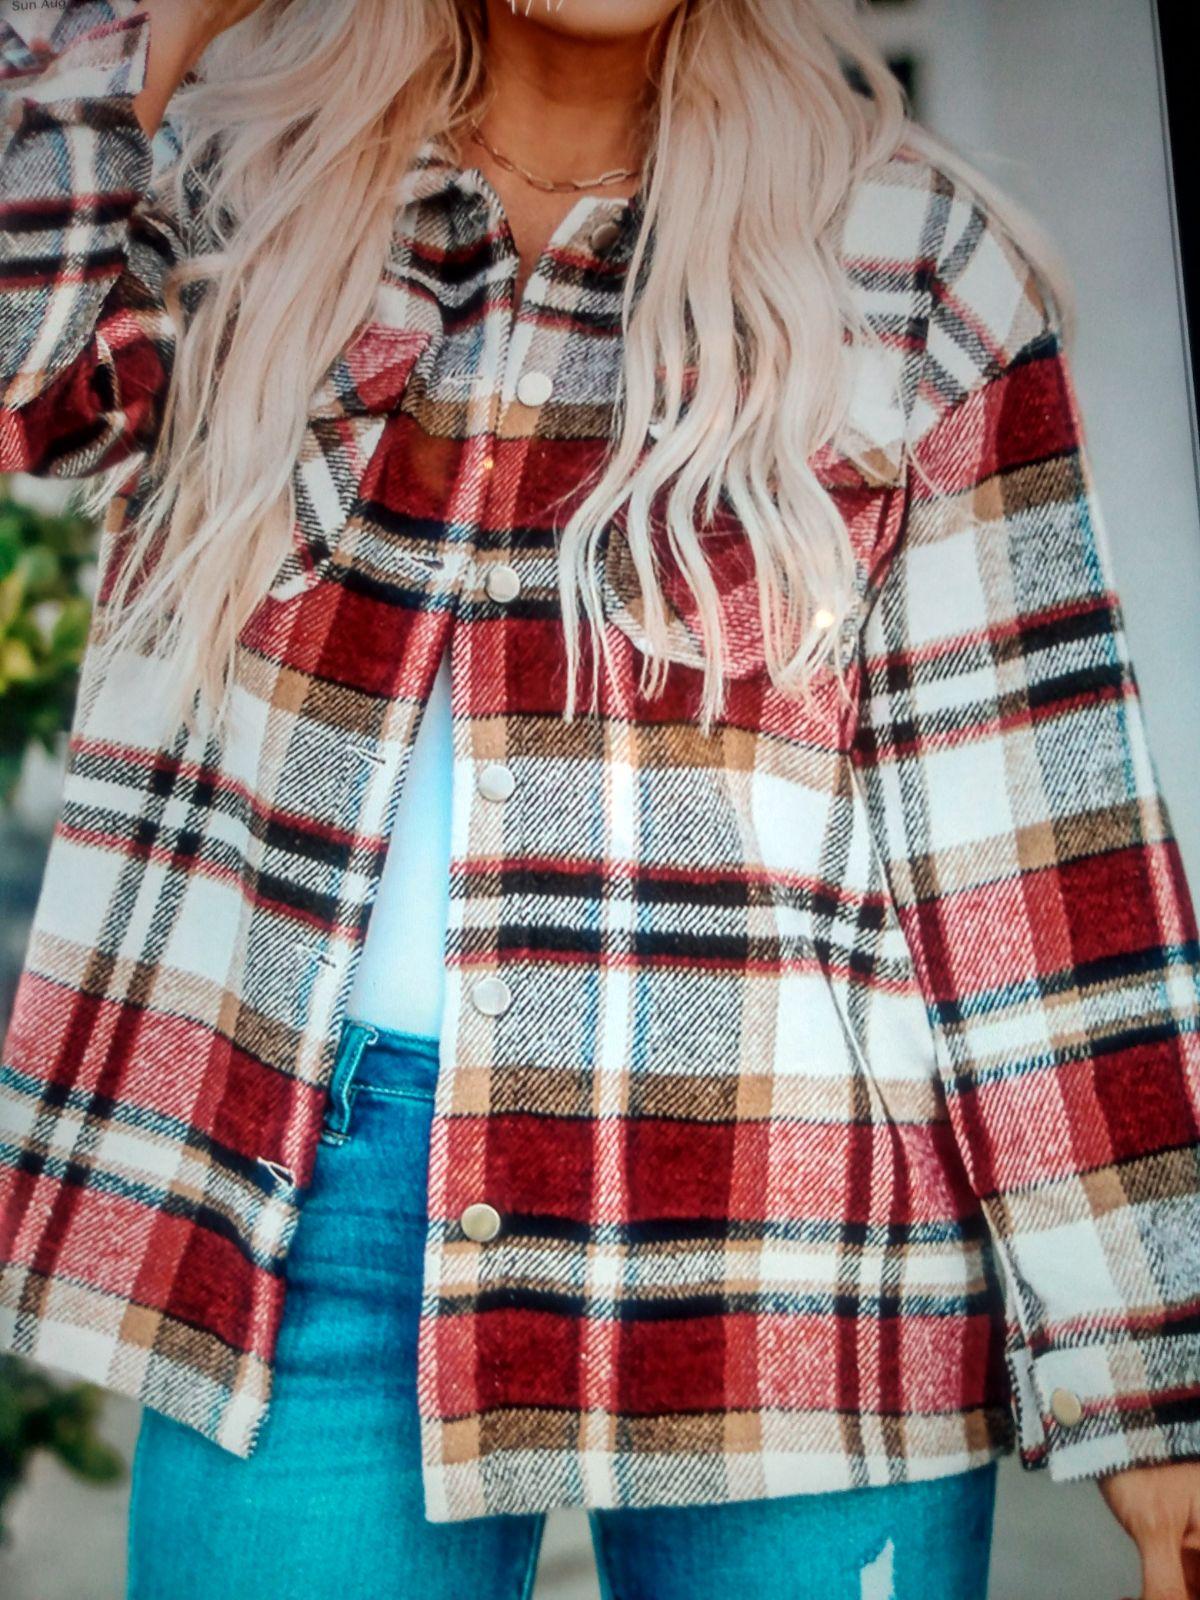 WOMEN'S FALL CASUAL PLAID BUTTON DOWN LONG SLEEVE - RED/BLK